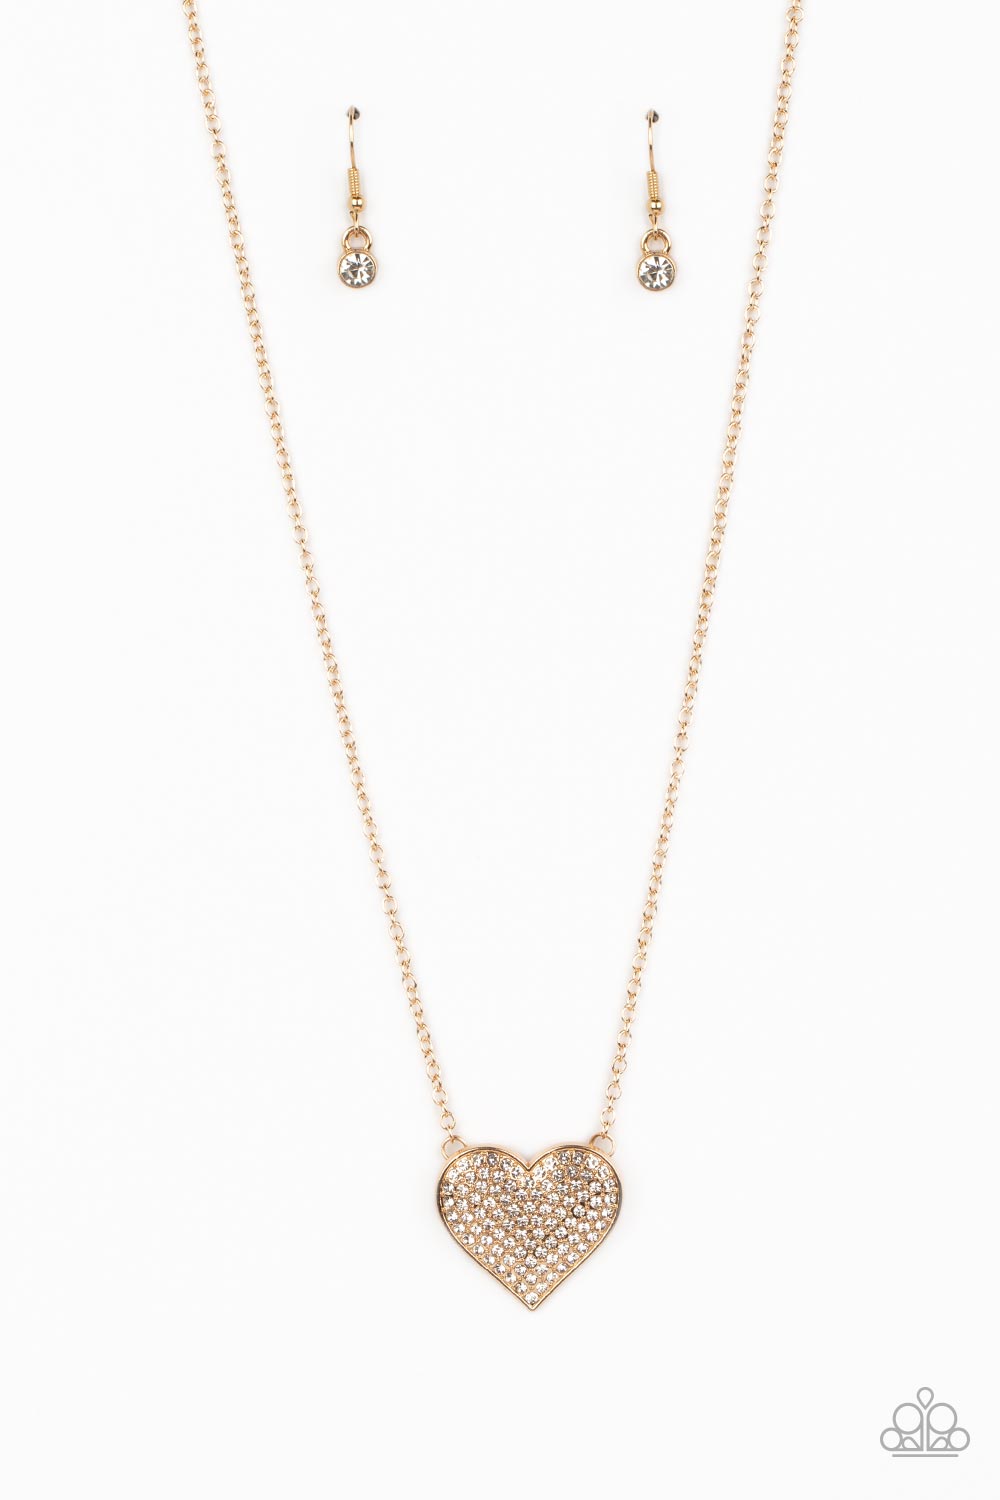 Spellbinding Sweetheart Gold & White Rhinestone Heart Necklace - Paparazzi Accessories- lightbox - CarasShop.com - $5 Jewelry by Cara Jewels